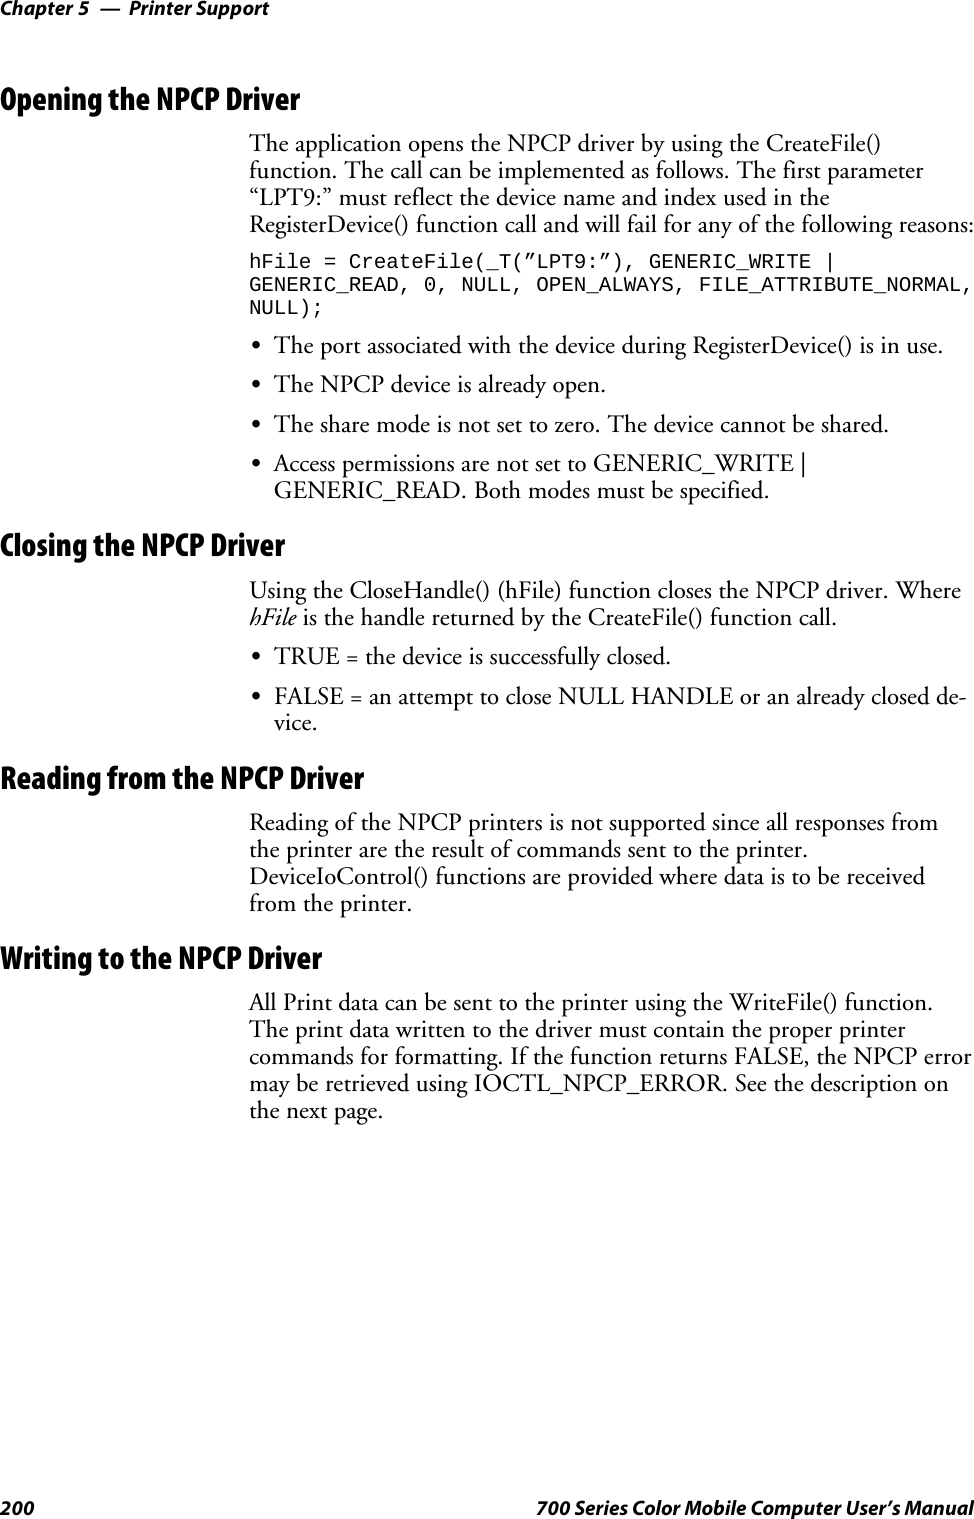 Printer SupportChapter —5200 700 Series Color Mobile Computer User’s ManualOpening the NPCP DriverTheapplicationopenstheNPCPdriverbyusingtheCreateFile()function. The call can be implemented as follows. The first parameter“LPT9:”mustreflectthedevicenameandindexusedintheRegisterDevice() function call and will fail for any of the following reasons:hFile = CreateFile(_T(”LPT9:”), GENERIC_WRITE |GENERIC_READ, 0, NULL, OPEN_ALWAYS, FILE_ATTRIBUTE_NORMAL,NULL);SThe port associated with the device during RegisterDevice() is in use.SThe NPCP device is already open.SThe share mode is not set to zero. The device cannot be shared.SAccess permissions are not set to GENERIC_WRITE |GENERIC_READ. Both modes must be specified.Closing the NPCP DriverUsing the CloseHandle() (hFile) function closes the NPCP driver. WherehFile is the handle returned by the CreateFile() function call.STRUE = the device is successfully closed.SFALSE = an attempt to close NULL HANDLE or an already closed de-vice.Reading from the NPCP DriverReading of the NPCP printers is not supported since all responses fromthe printer are the result of commands sent to the printer.DeviceIoControl() functions are provided where data is to be receivedfrom the printer.Writing to the NPCP DriverAll Print data can be sent to the printer using the WriteFile() function.The print data written to the driver must contain the proper printercommands for formatting. If the function returns FALSE, the NPCP errormay be retrieved using IOCTL_NPCP_ERROR. See the description onthe next page.